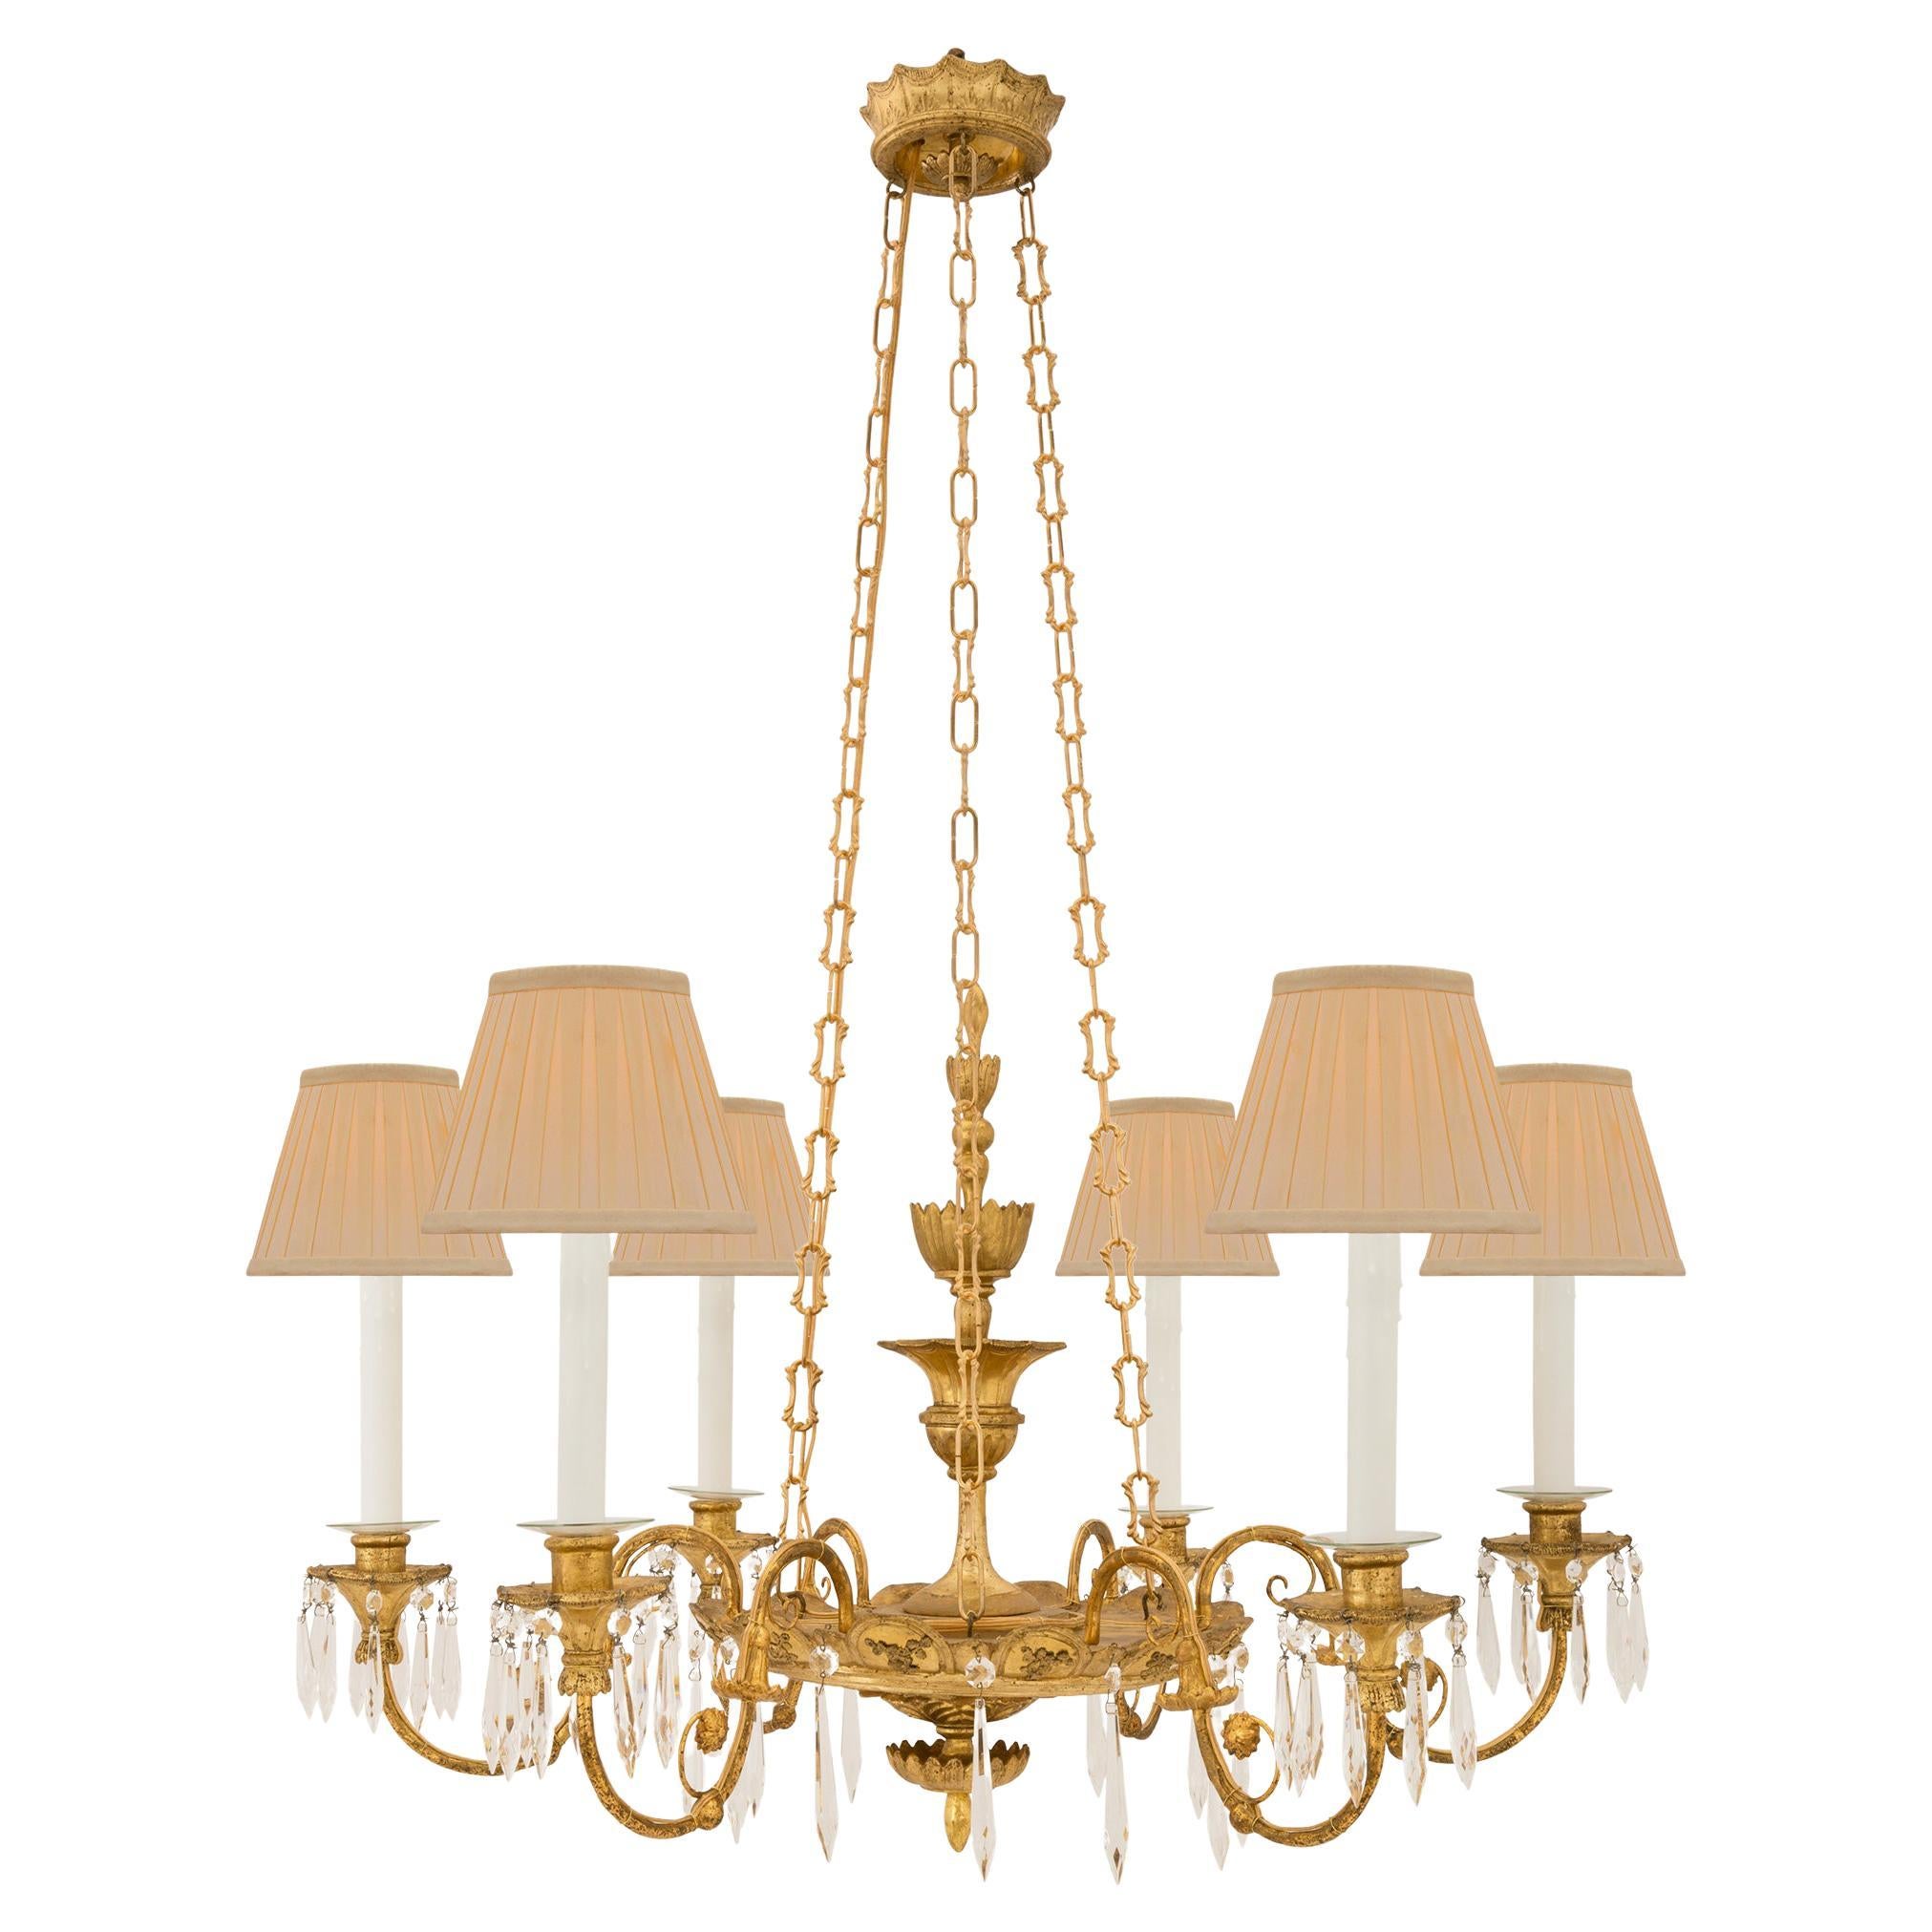 Italian 19th Century Neoclassical Style Giltwood and Ormolu Chandelier For Sale